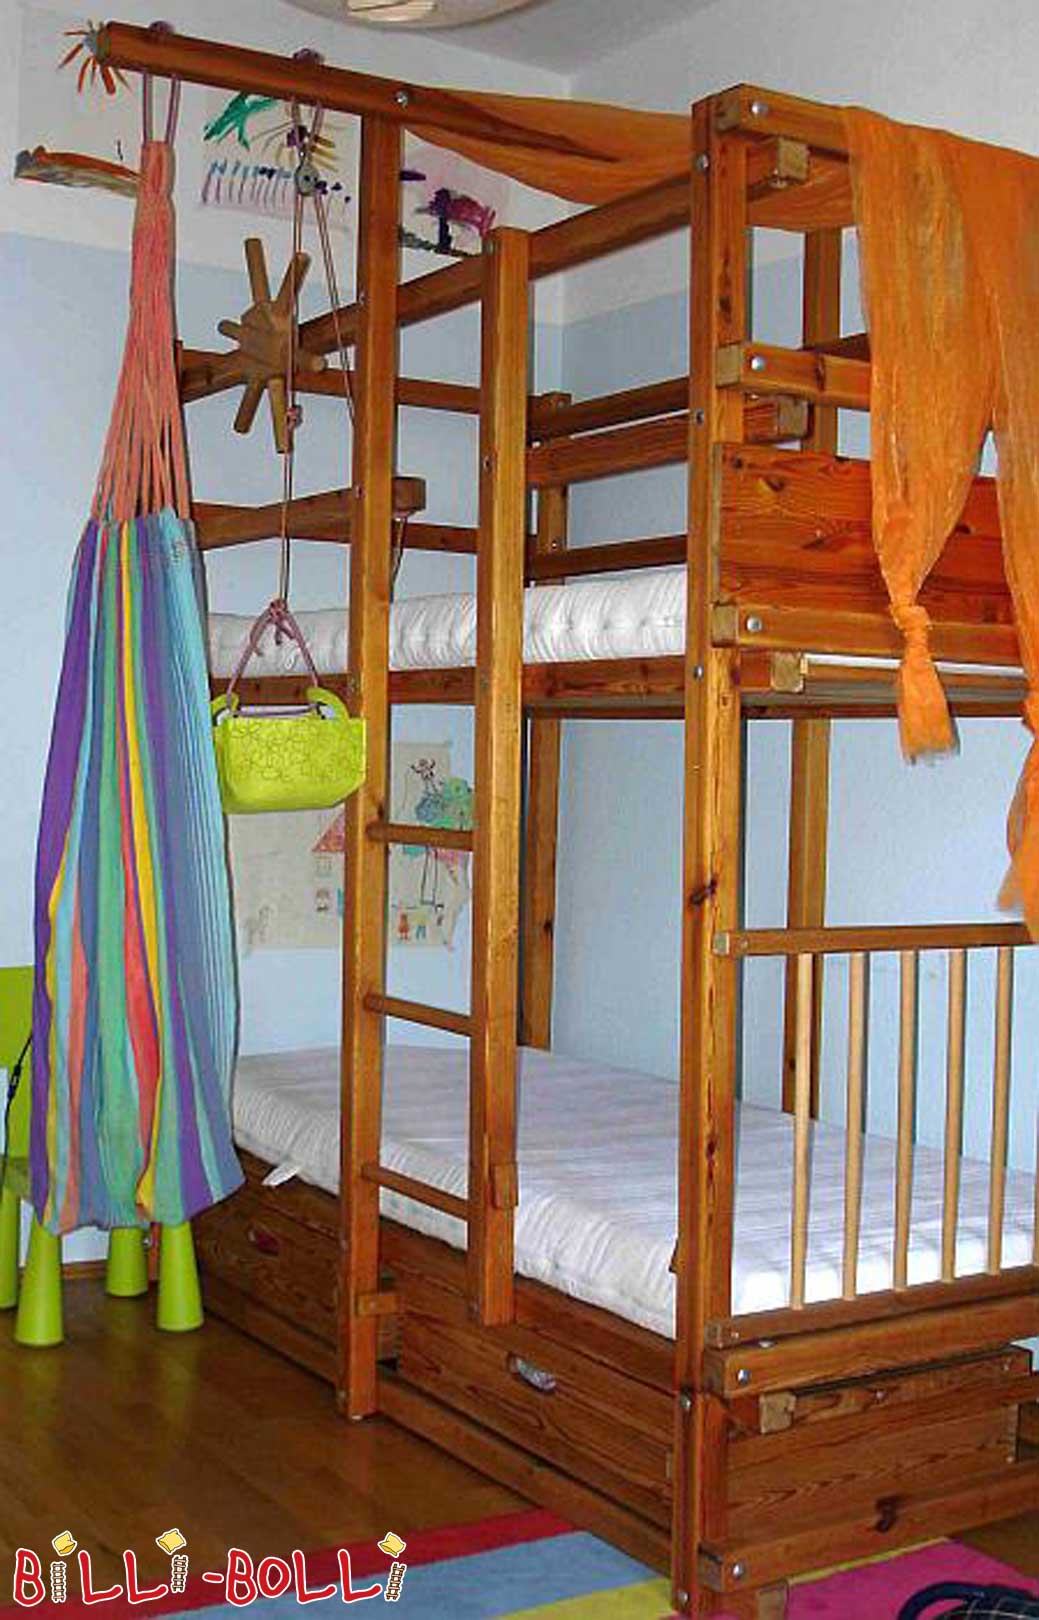 Adventure Bed by Gullibo (Category: second hand loft bed)